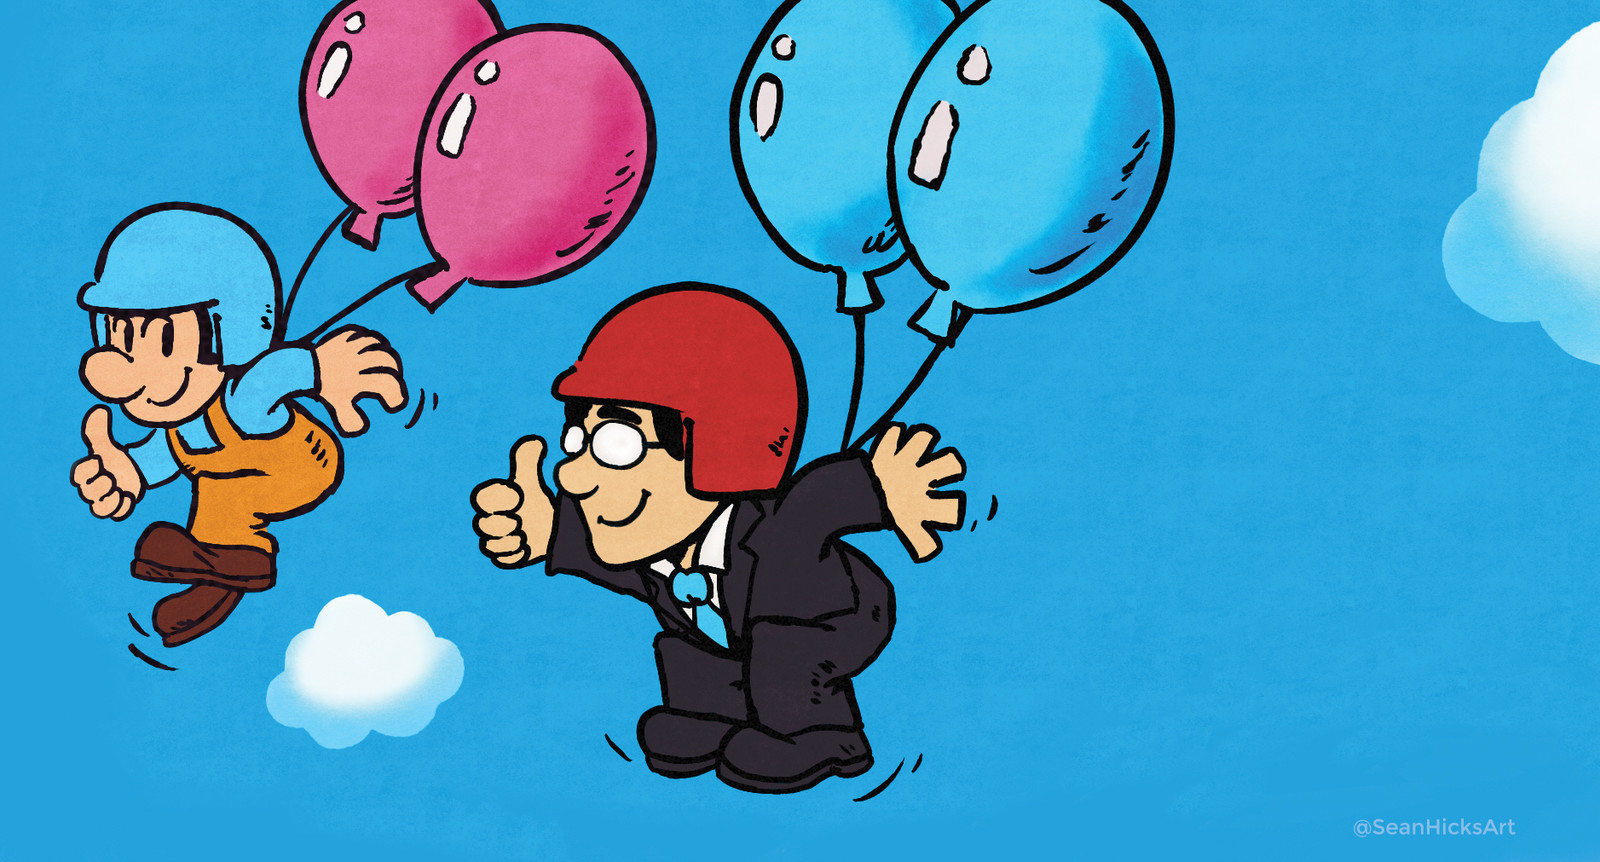 One of the first game Iwata worked on: Balloon Fight. I wanted to capture the style and essence of the original Balloon Fight artwork seen on box art or cartridges. It was fun drawing Iwata in this style. 